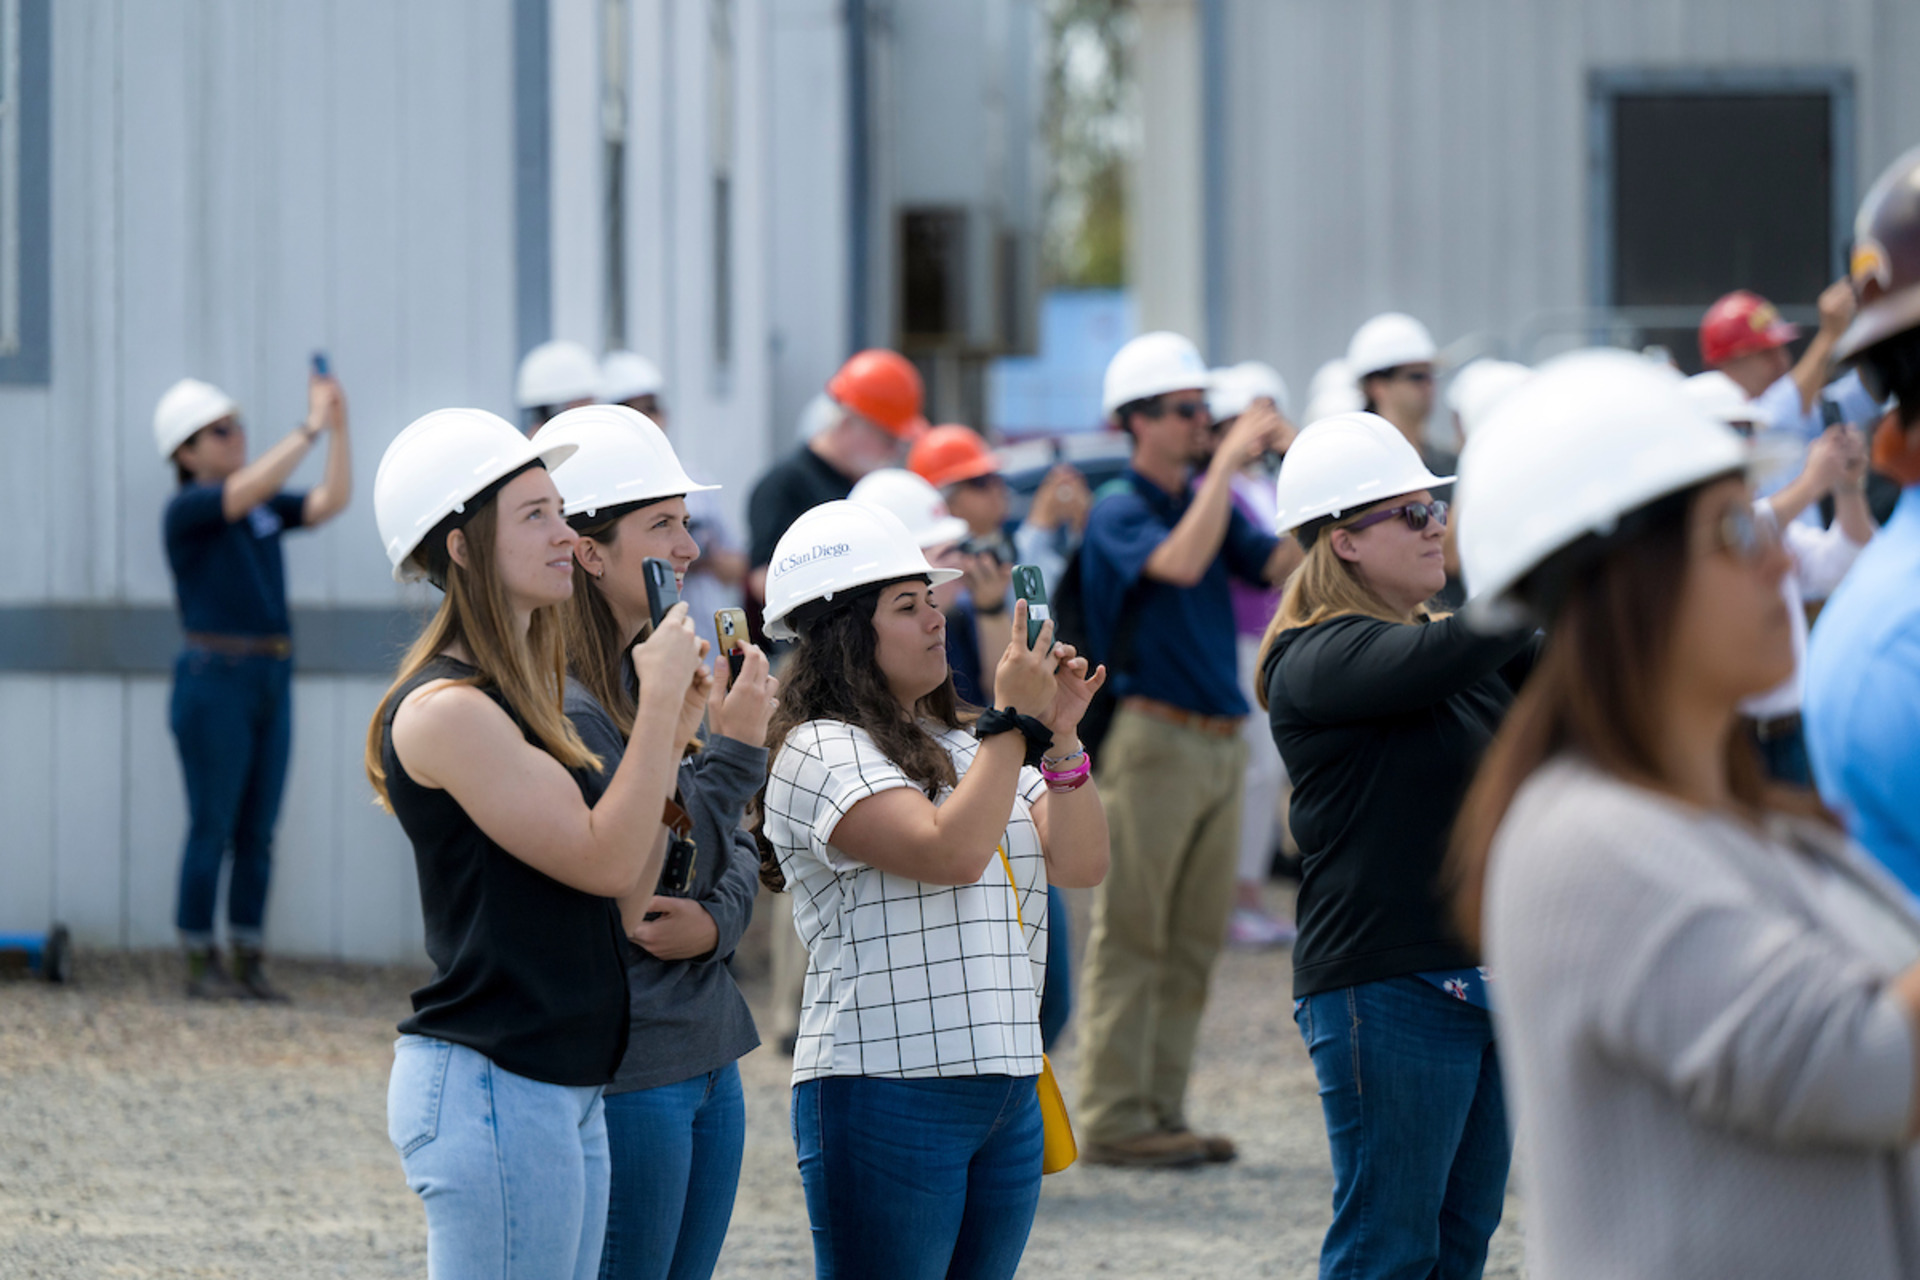 Researchers and project-affiliated viewers watch the project tests with phones in hand.